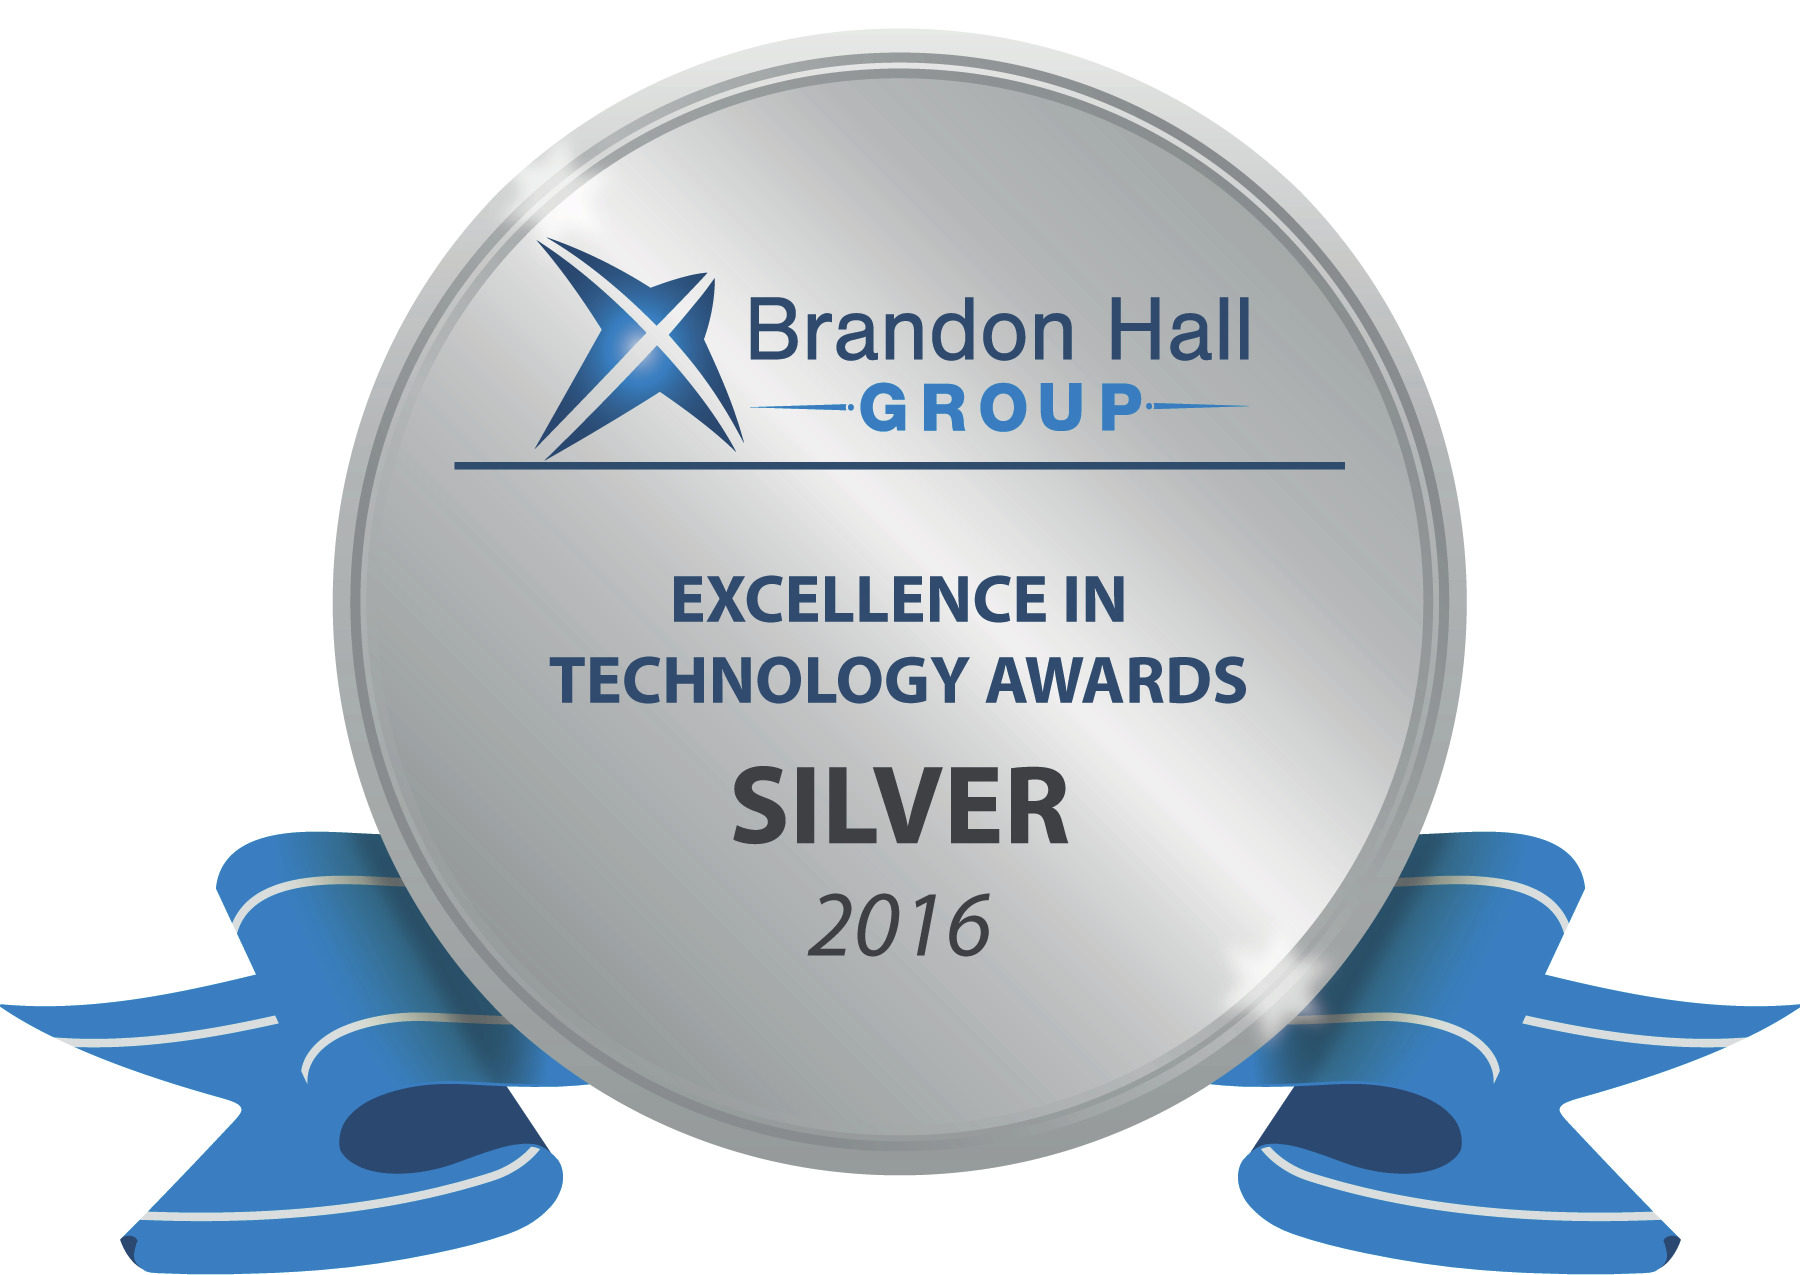 Silver excellence in technology awards